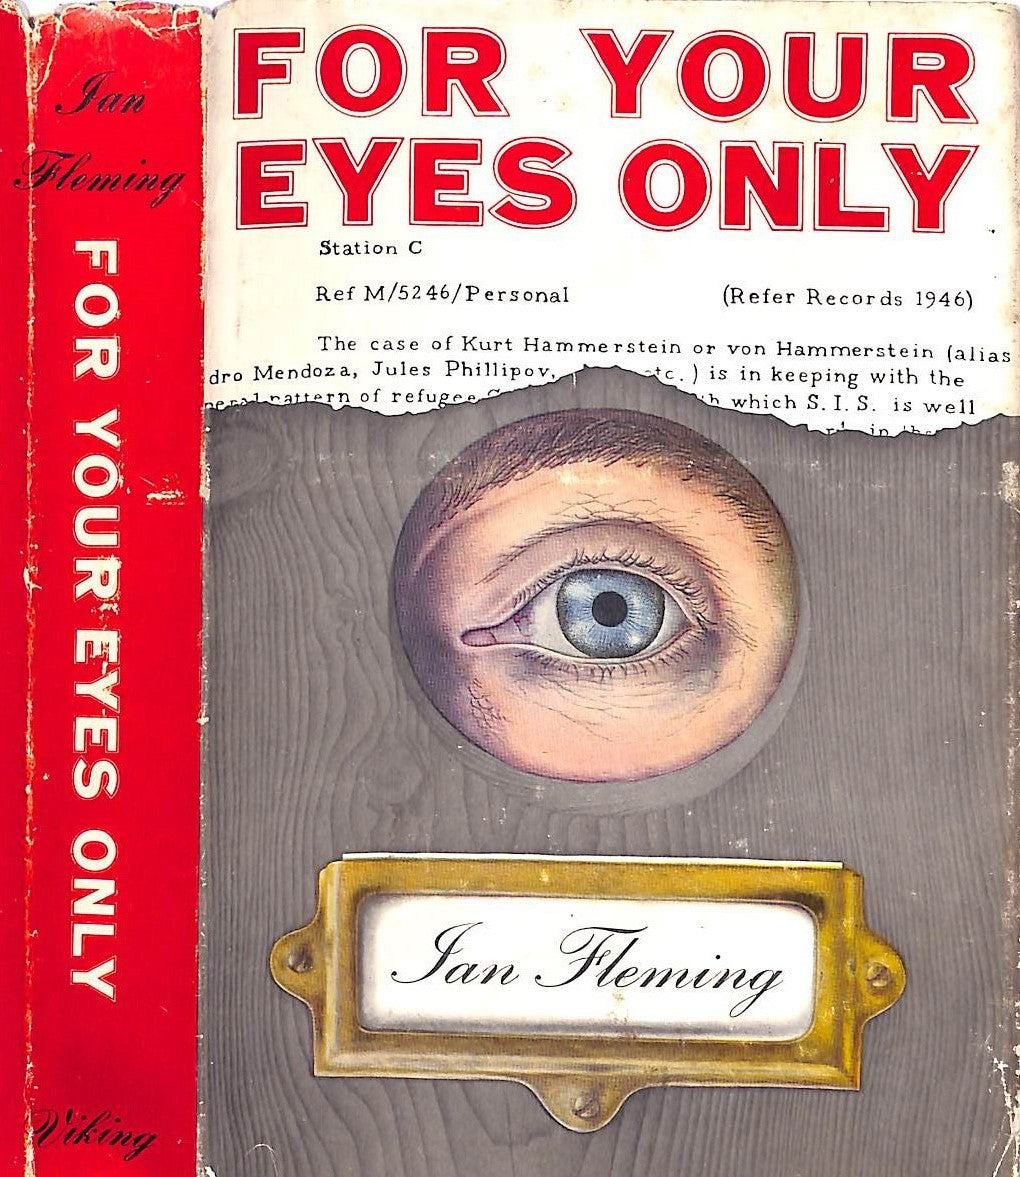 "For Your Eyes Only: Five Secret Exploits Of James Bond" 1960 FLEMING, Ian